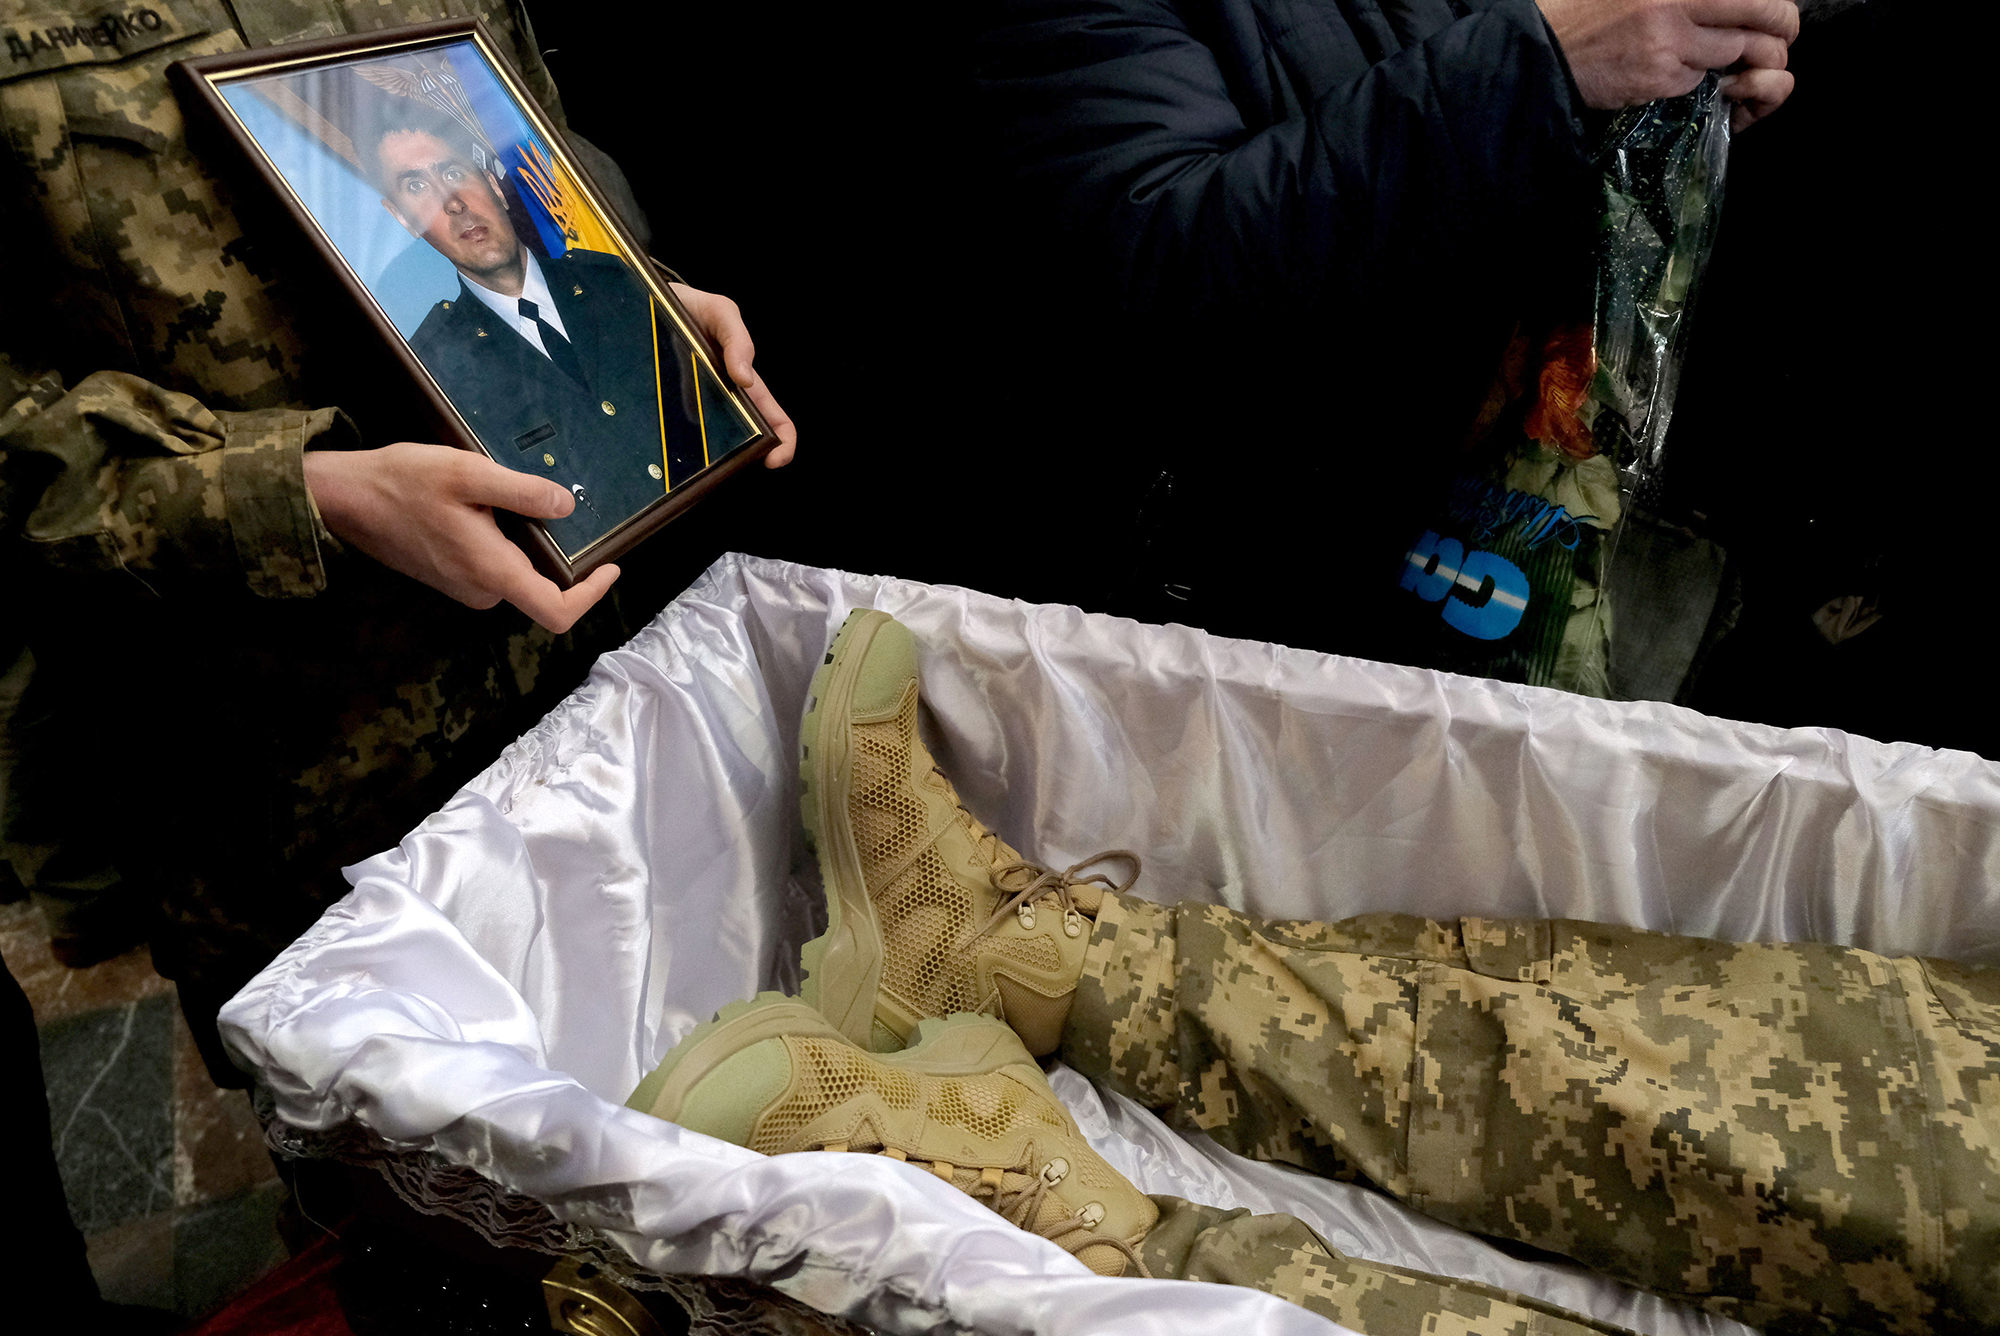 Senior Private Andrii Stefanyshyn, 39, Senior Lieutenant Taras Didukh, 25, and Sergeant Dmytro Kabakov, 58, were laid to rest during a service at Saints Peter and Paul Garrysin Church in Lviv, Ukraine, Friday, March 11.